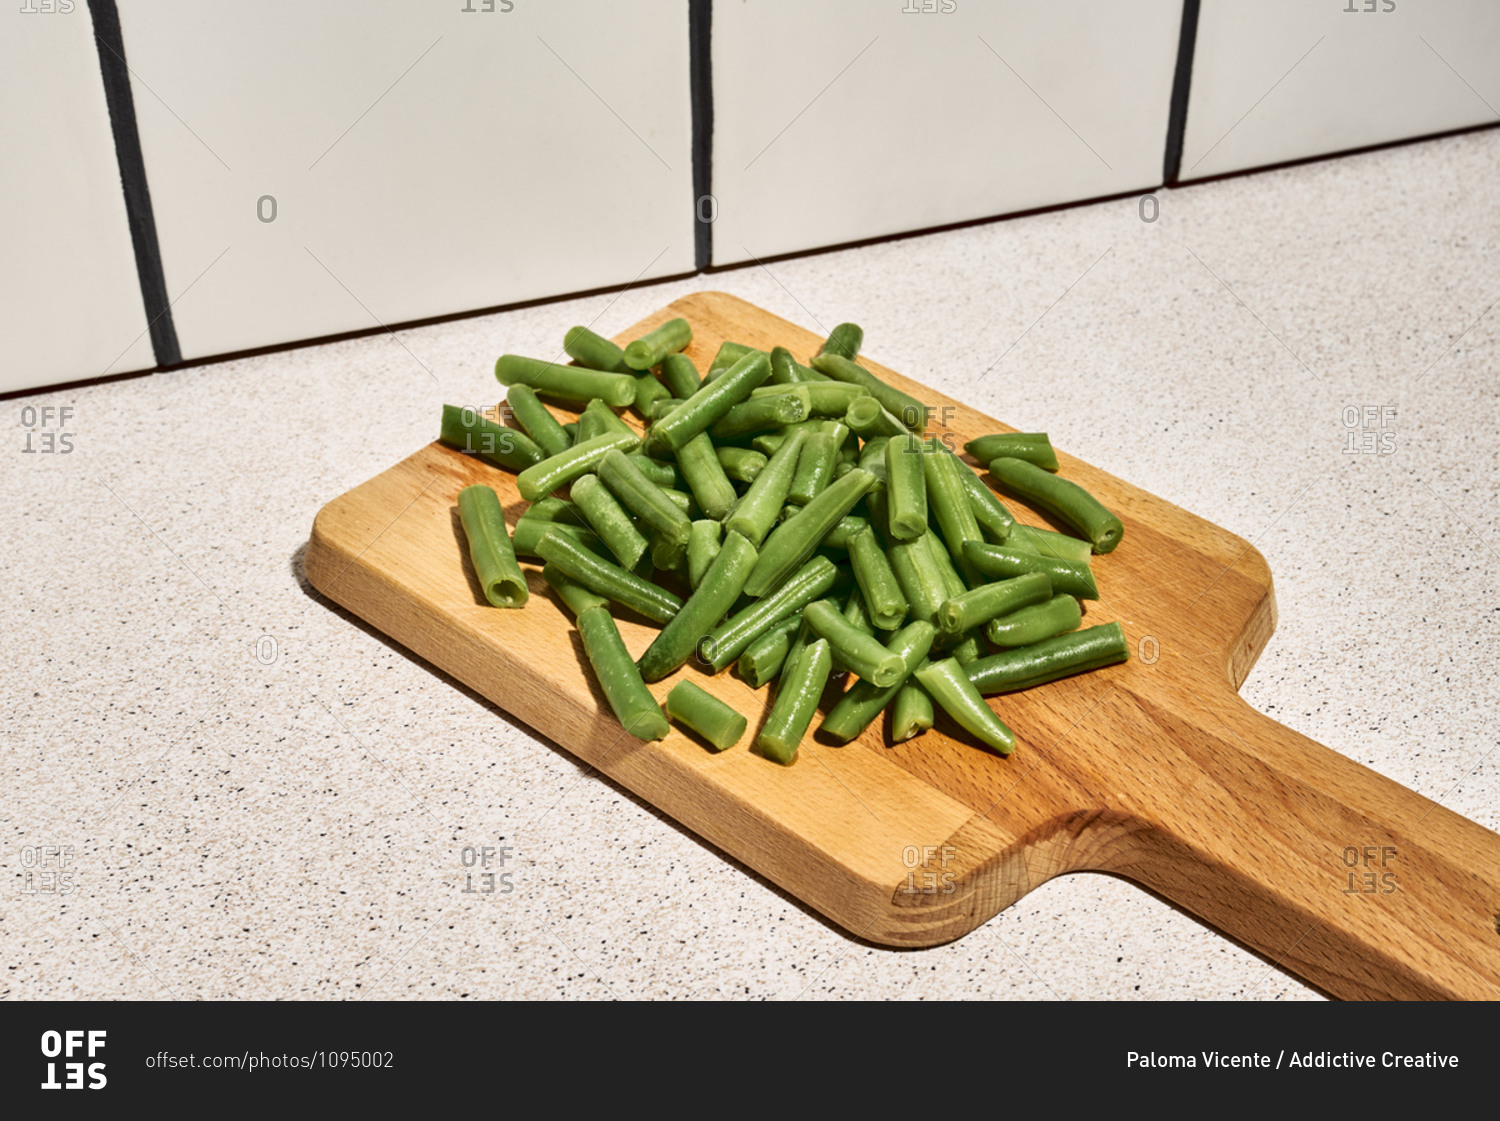 Pile of chopped green beans on wooden cutting board placed on table near glass of water in kitchen